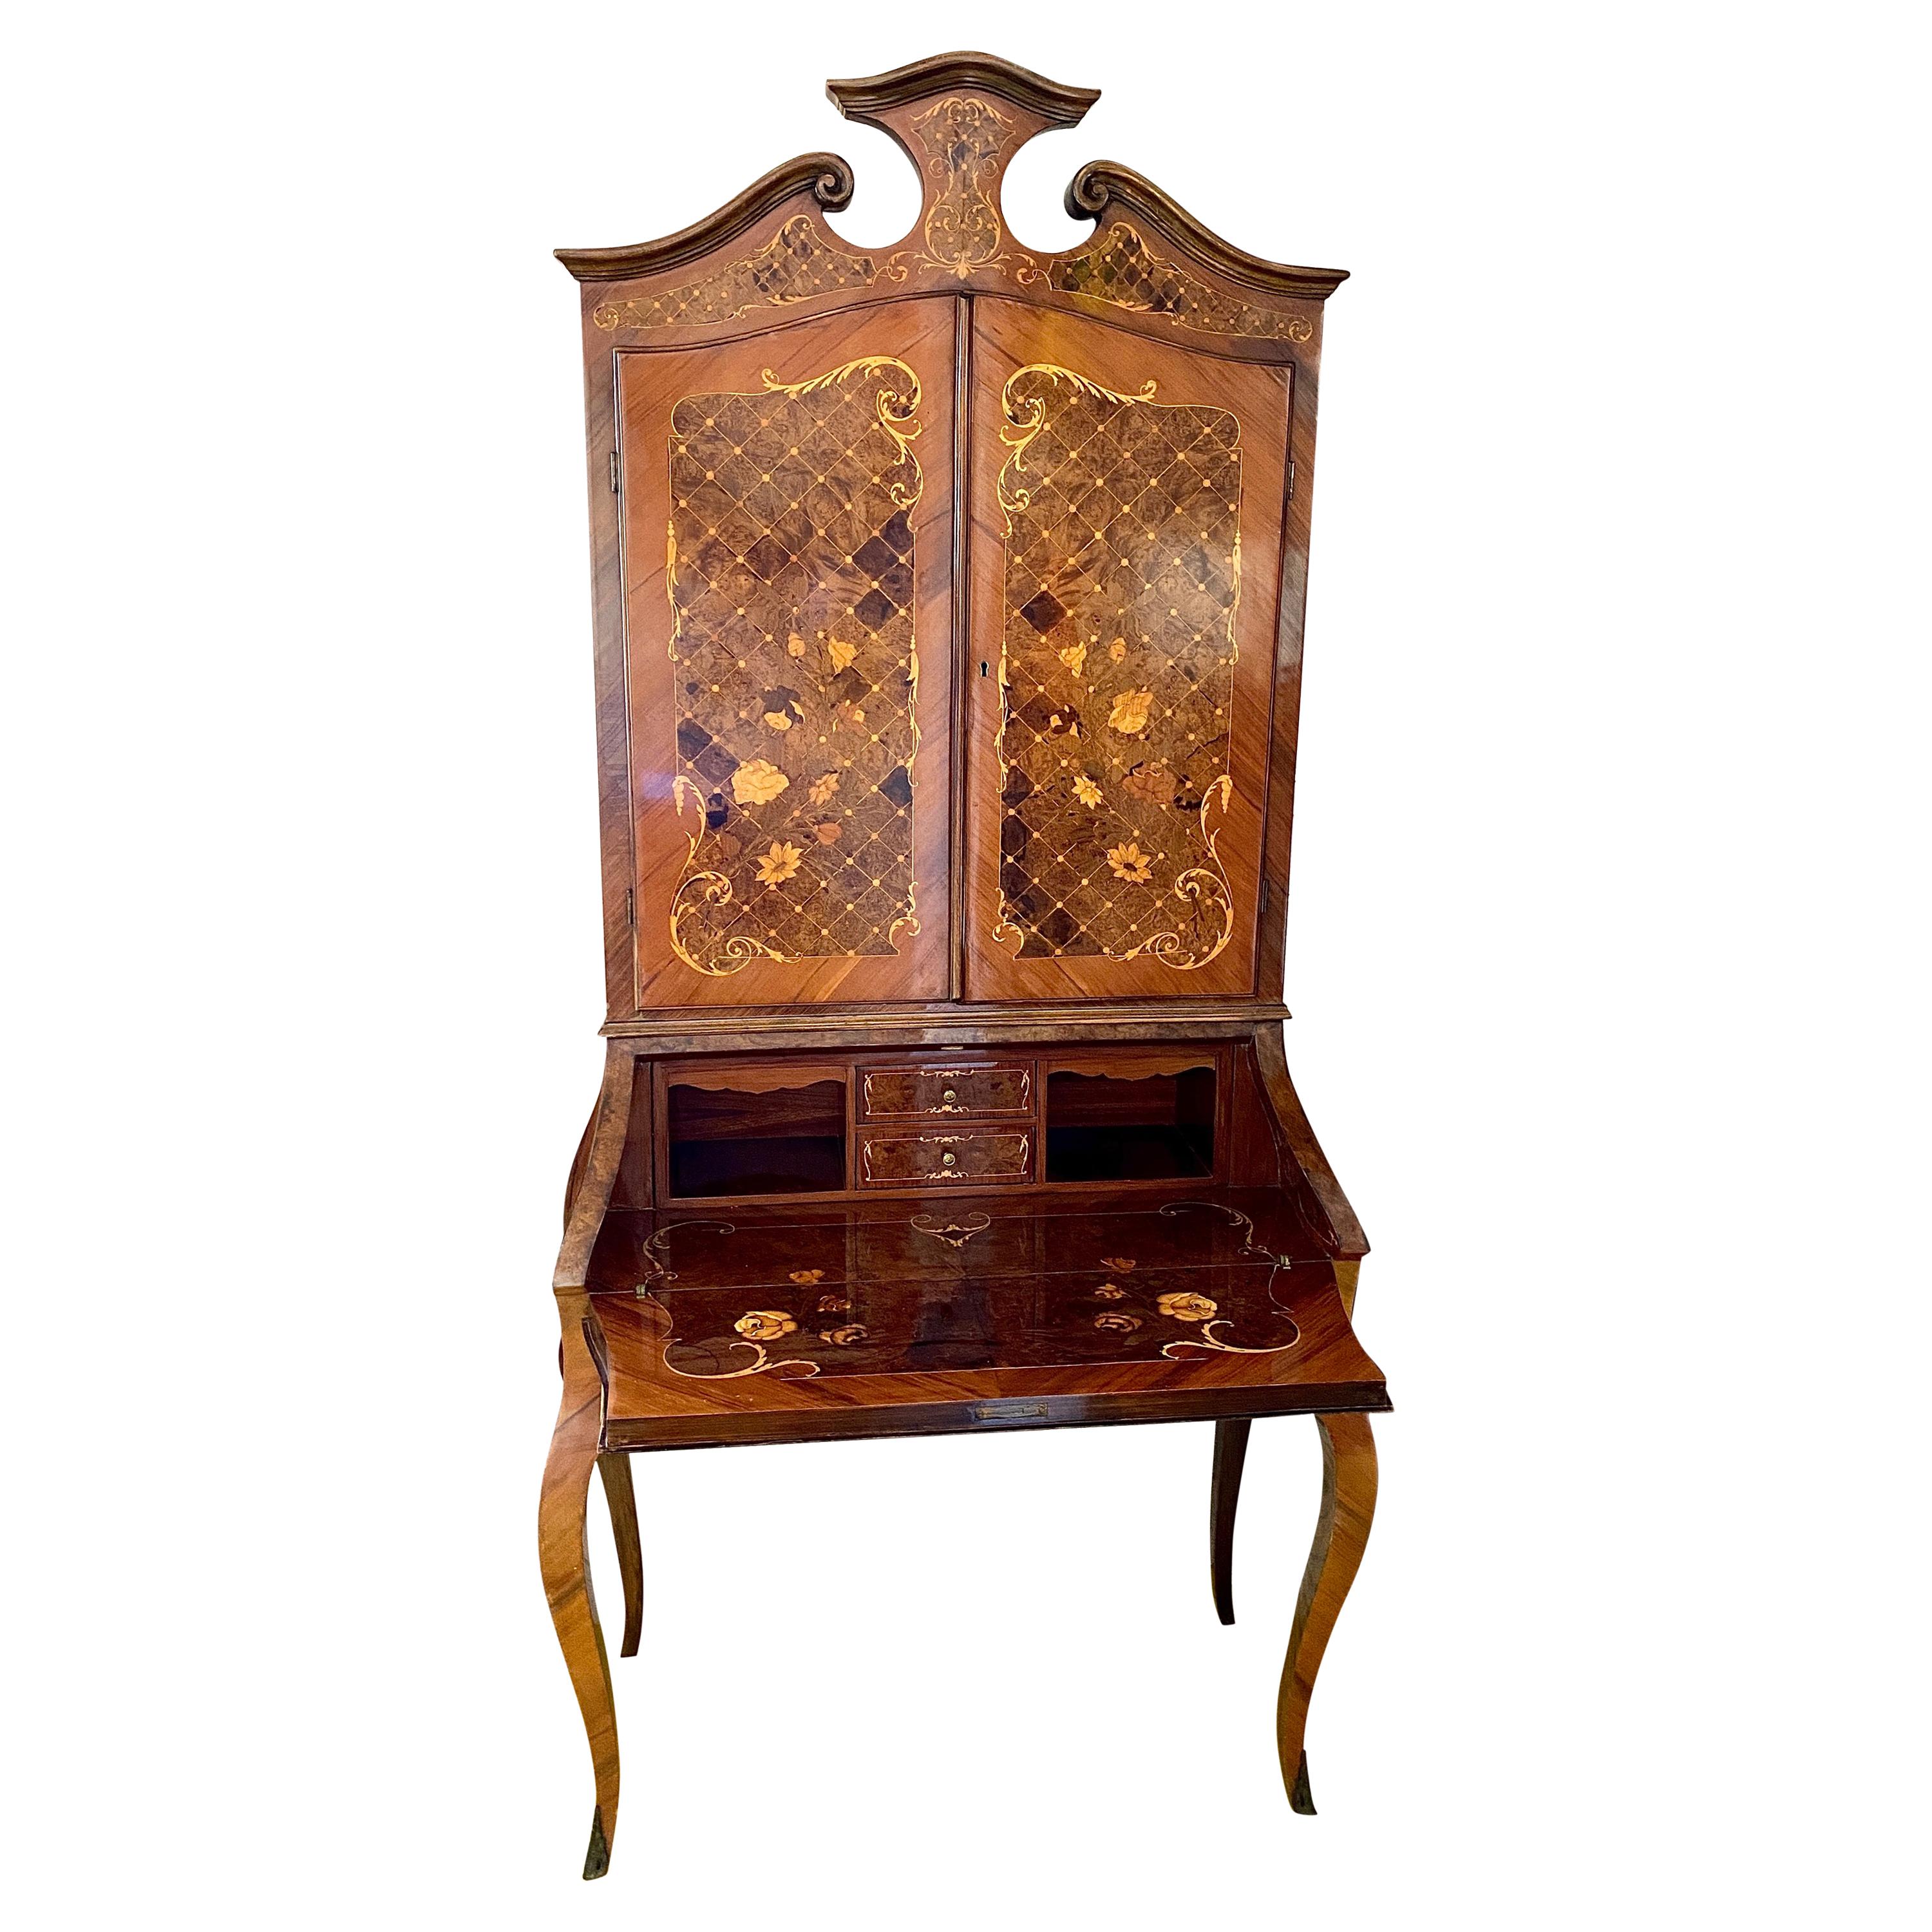 Italian c. 1910 Satinwood Secretaire with Marquetry Inlay For Sale